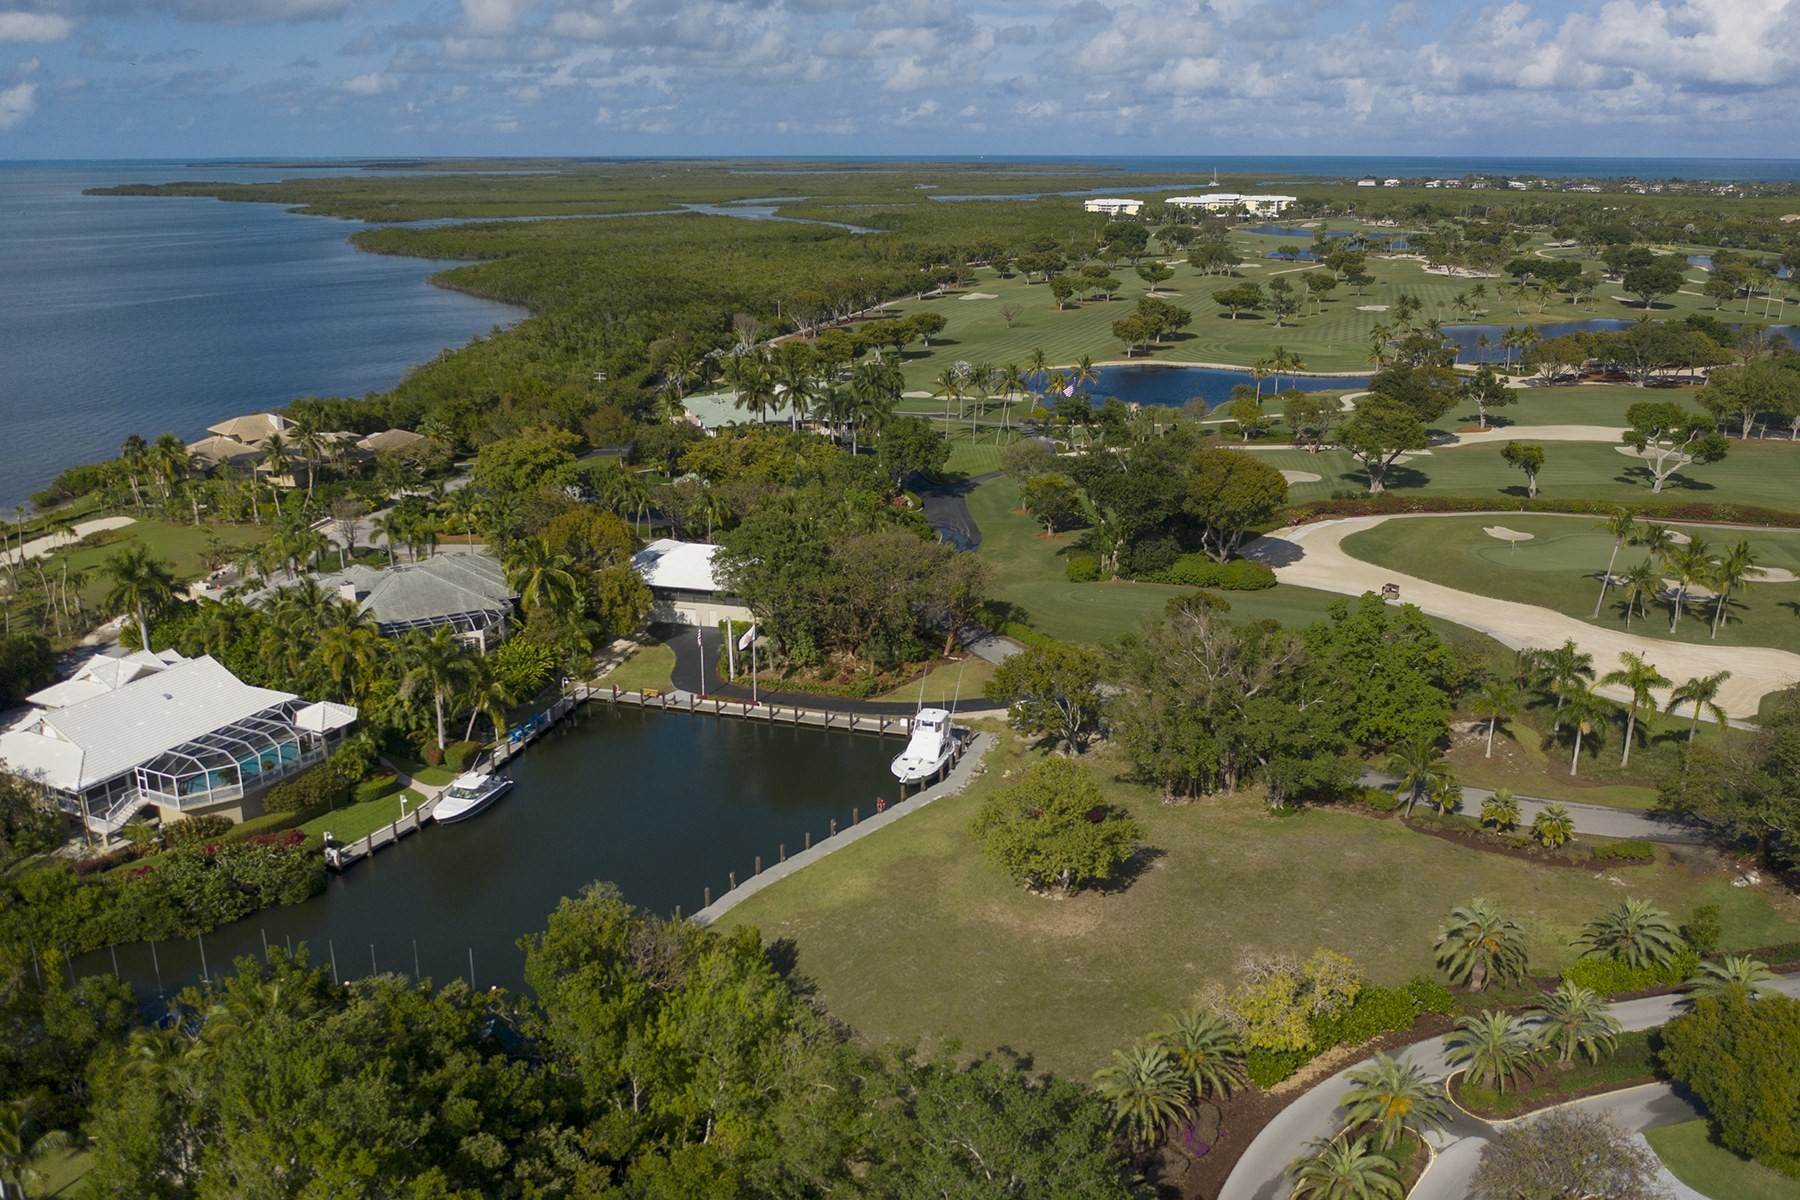 22. Property for Sale at Pumpkin Key - Private Island, Key Largo, FL Pumpkin Key - Private Island Key Largo, Florida 33037 United States